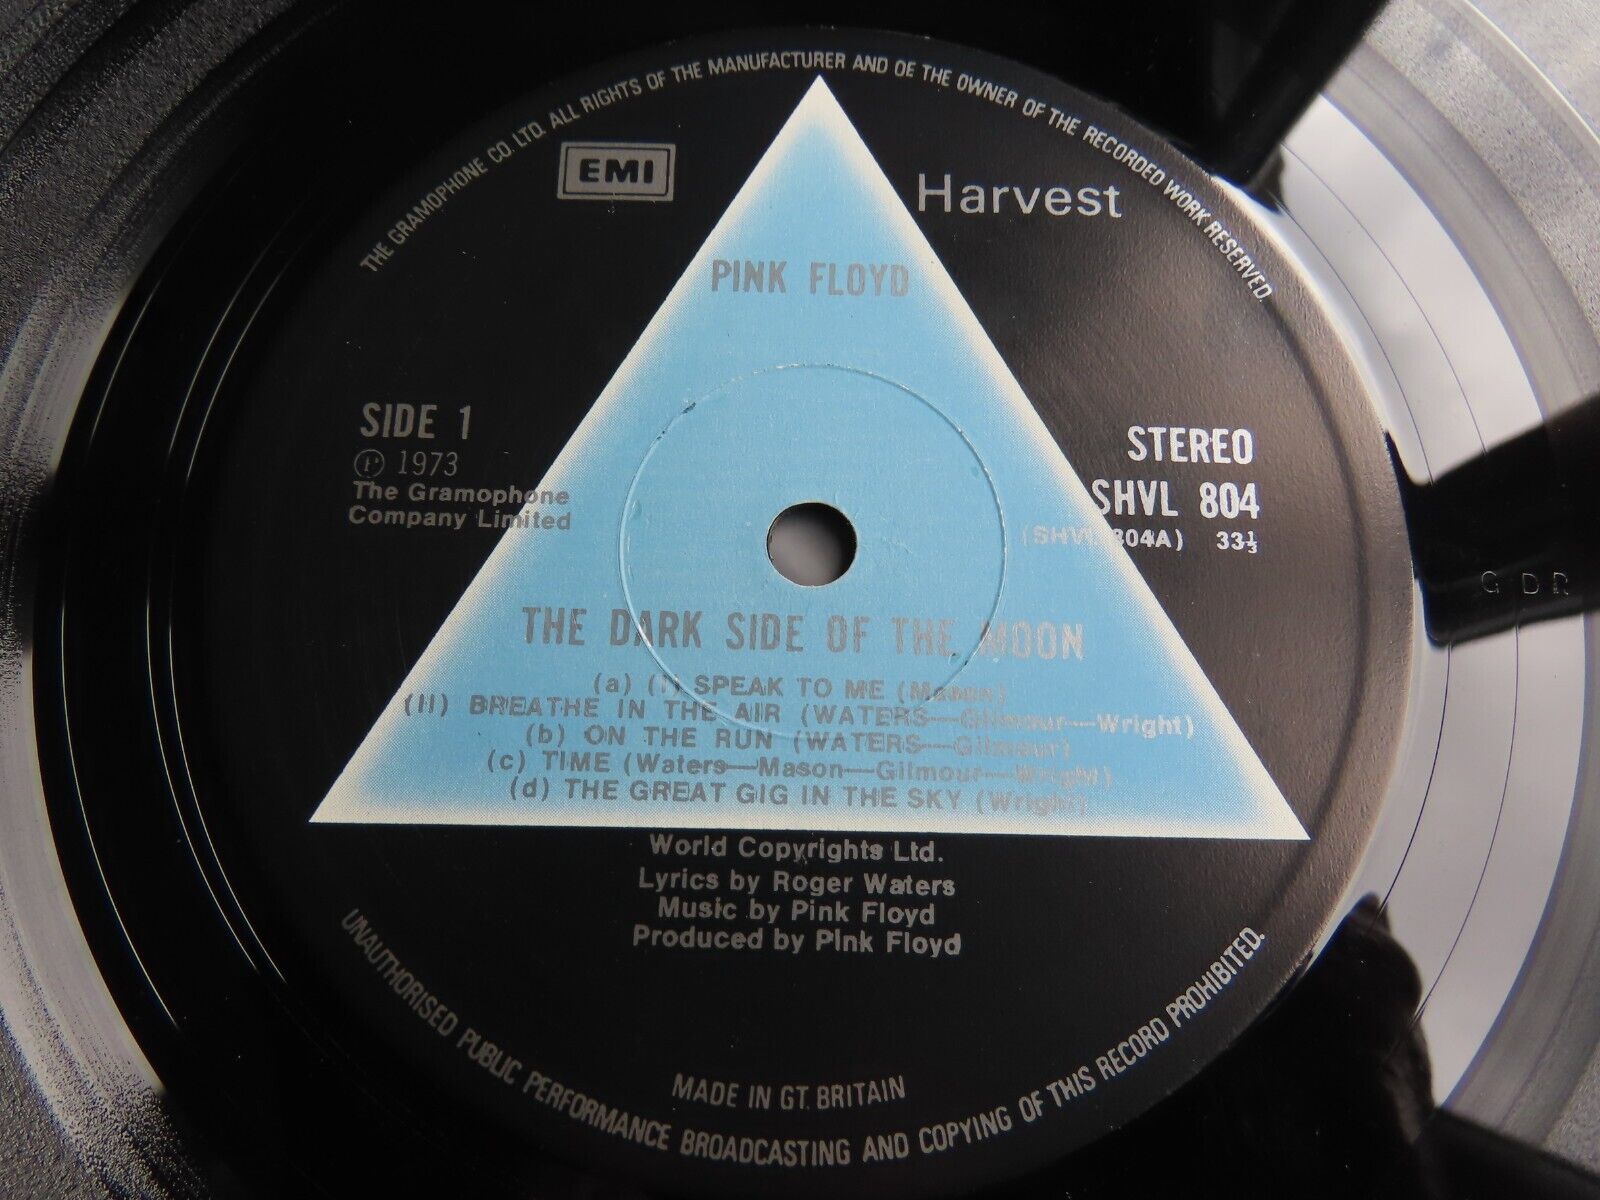 Pic 1 Superb. Pink Floyd's A2/B2 "Dark side of the moon" solid blue. UK 1st. + extras